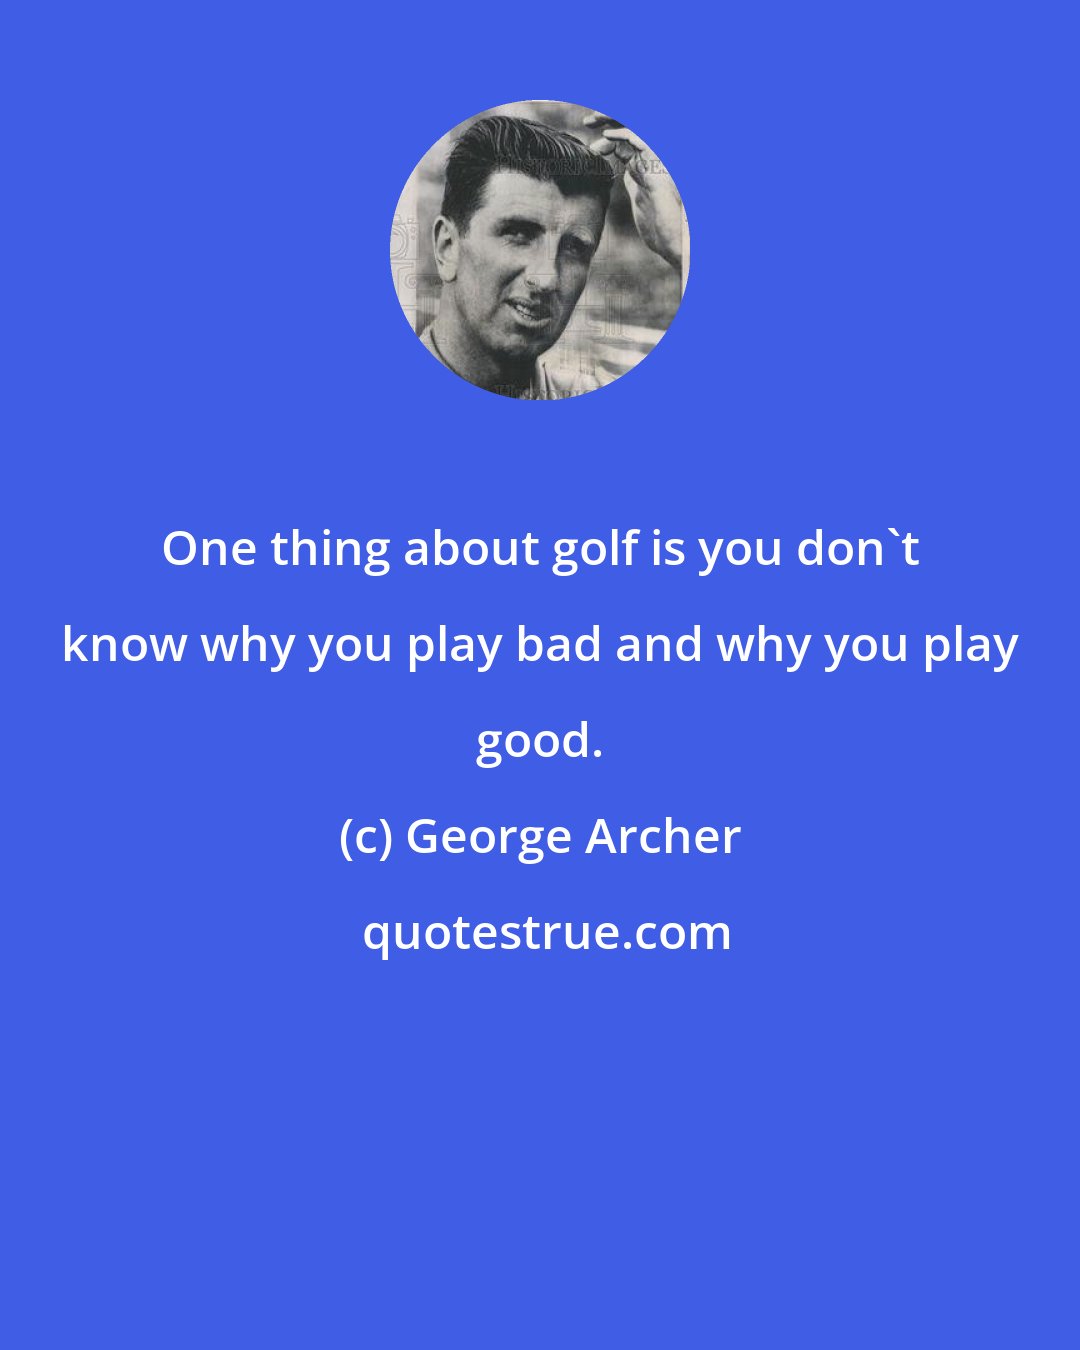 George Archer: One thing about golf is you don't know why you play bad and why you play good.